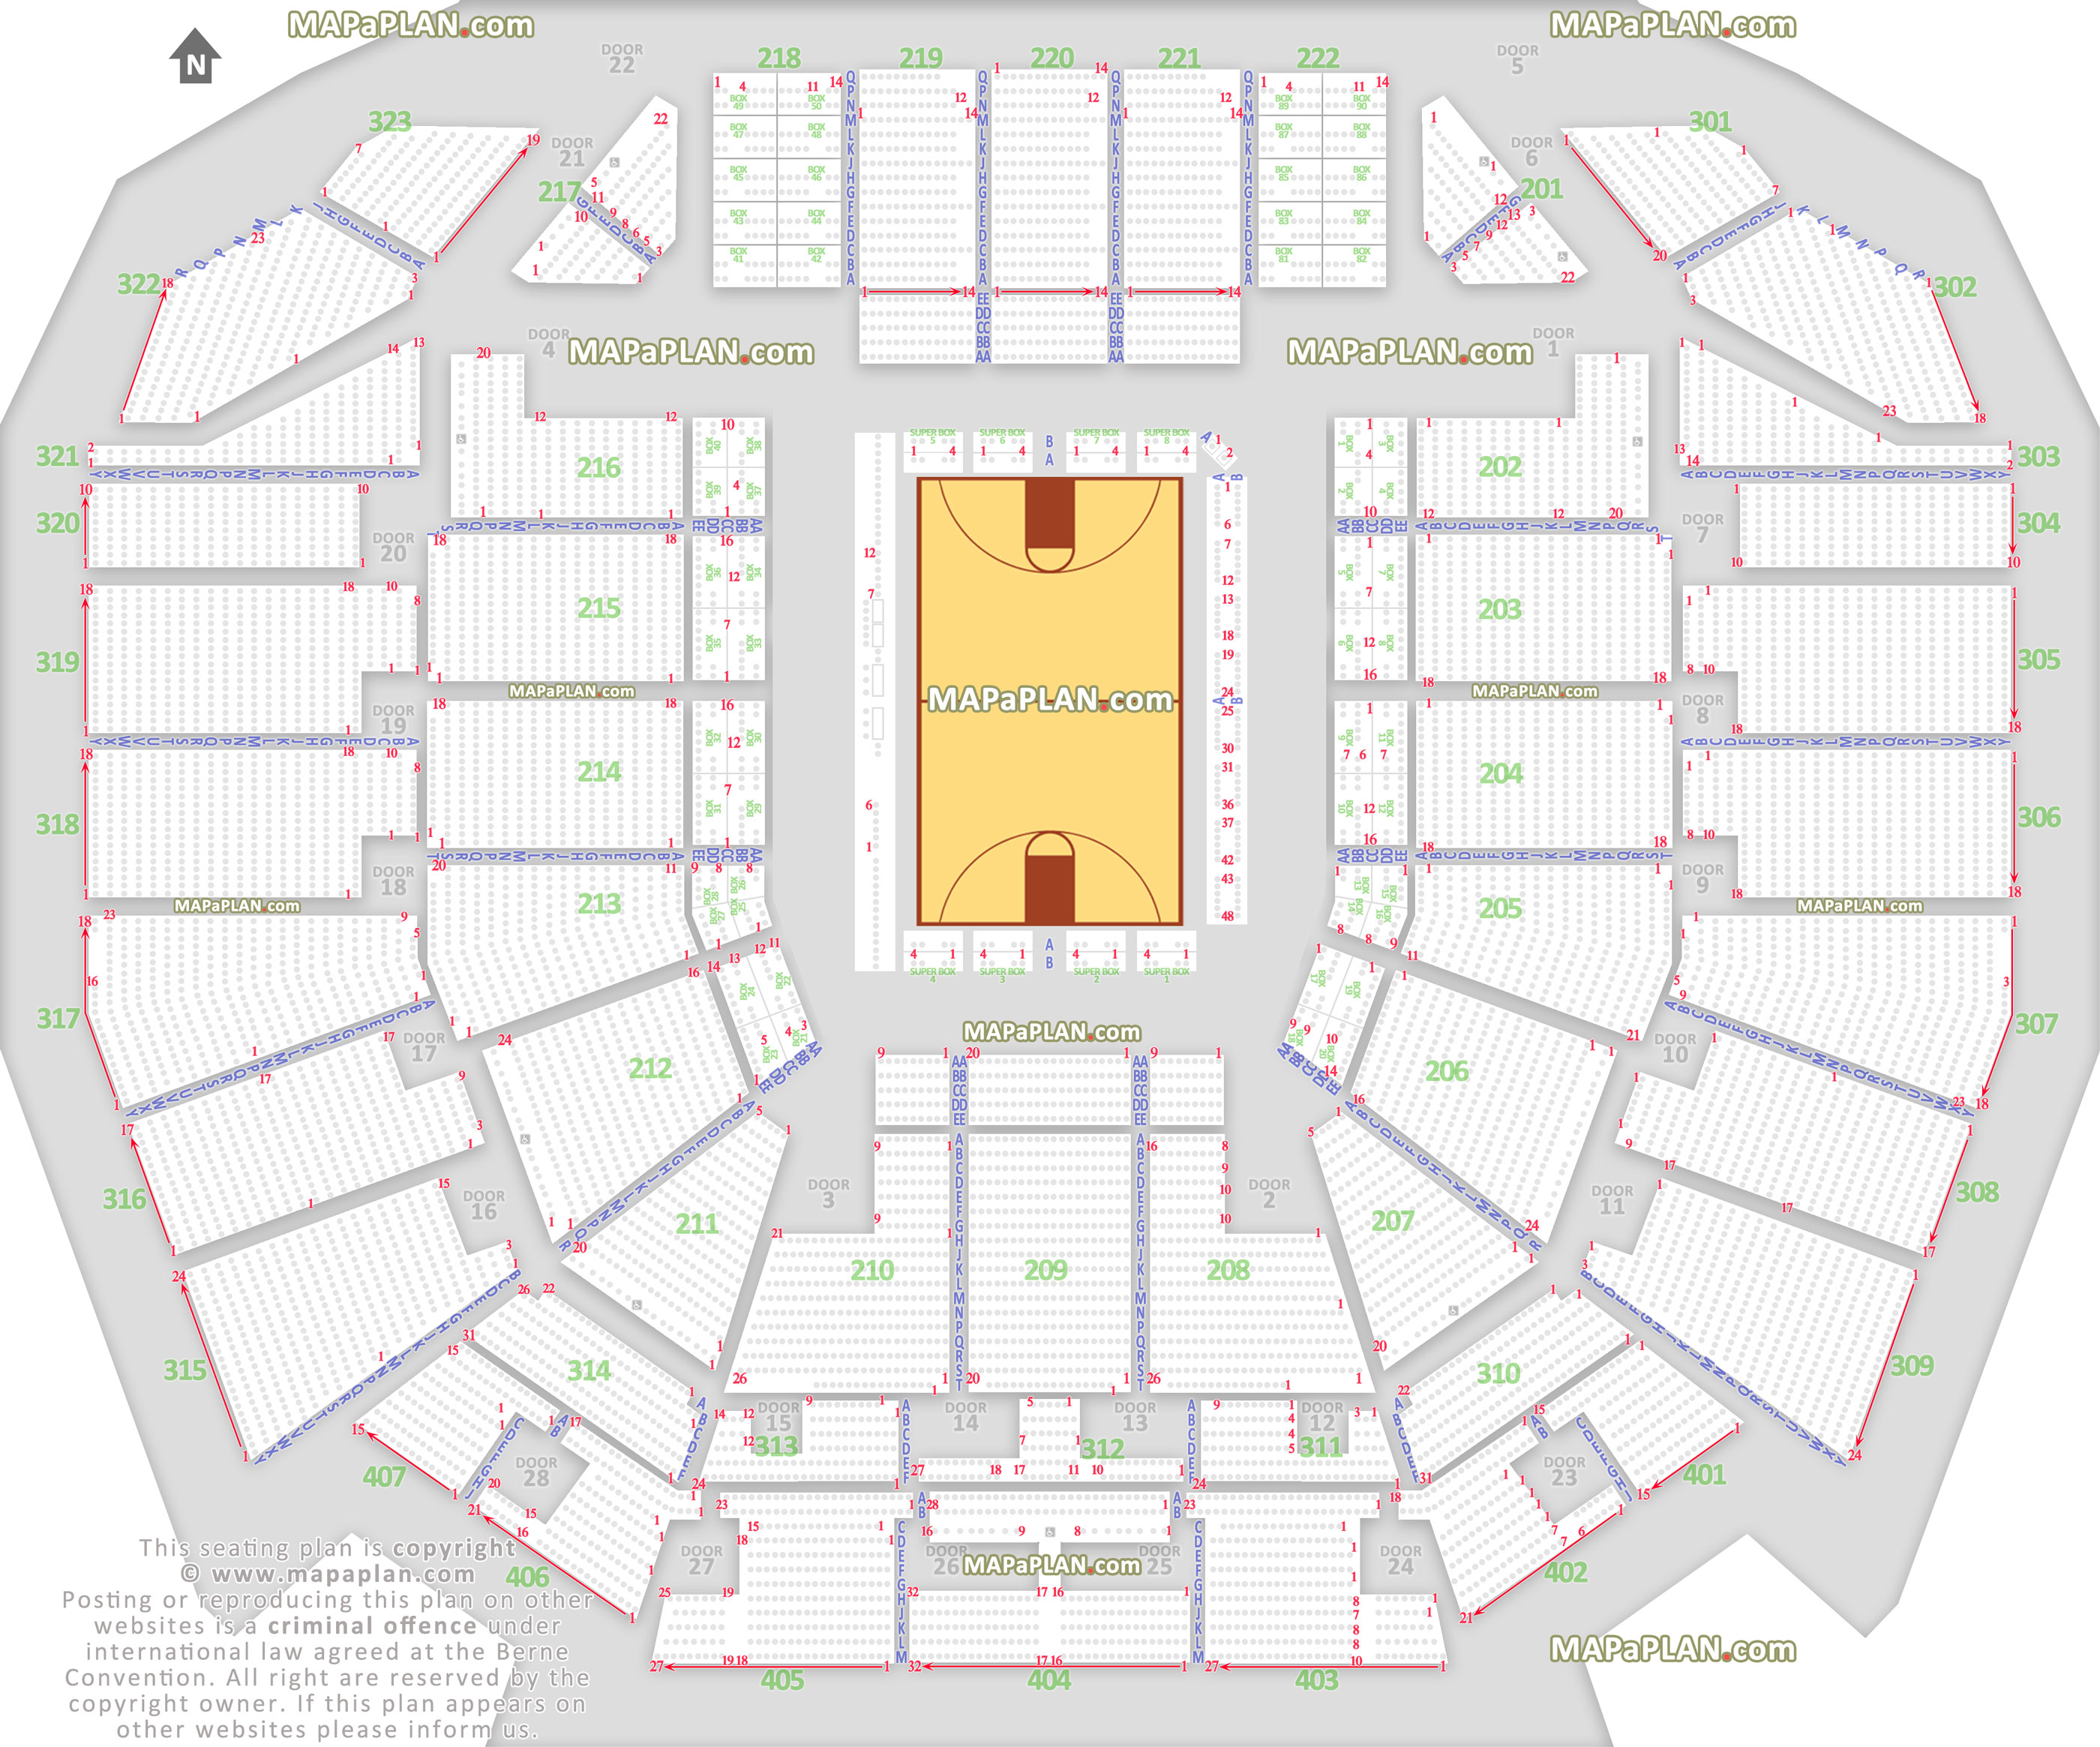 wildcats basketball game numbered floor map with lower upper tier including side view sections door plan Perth RAC Arena seating plan